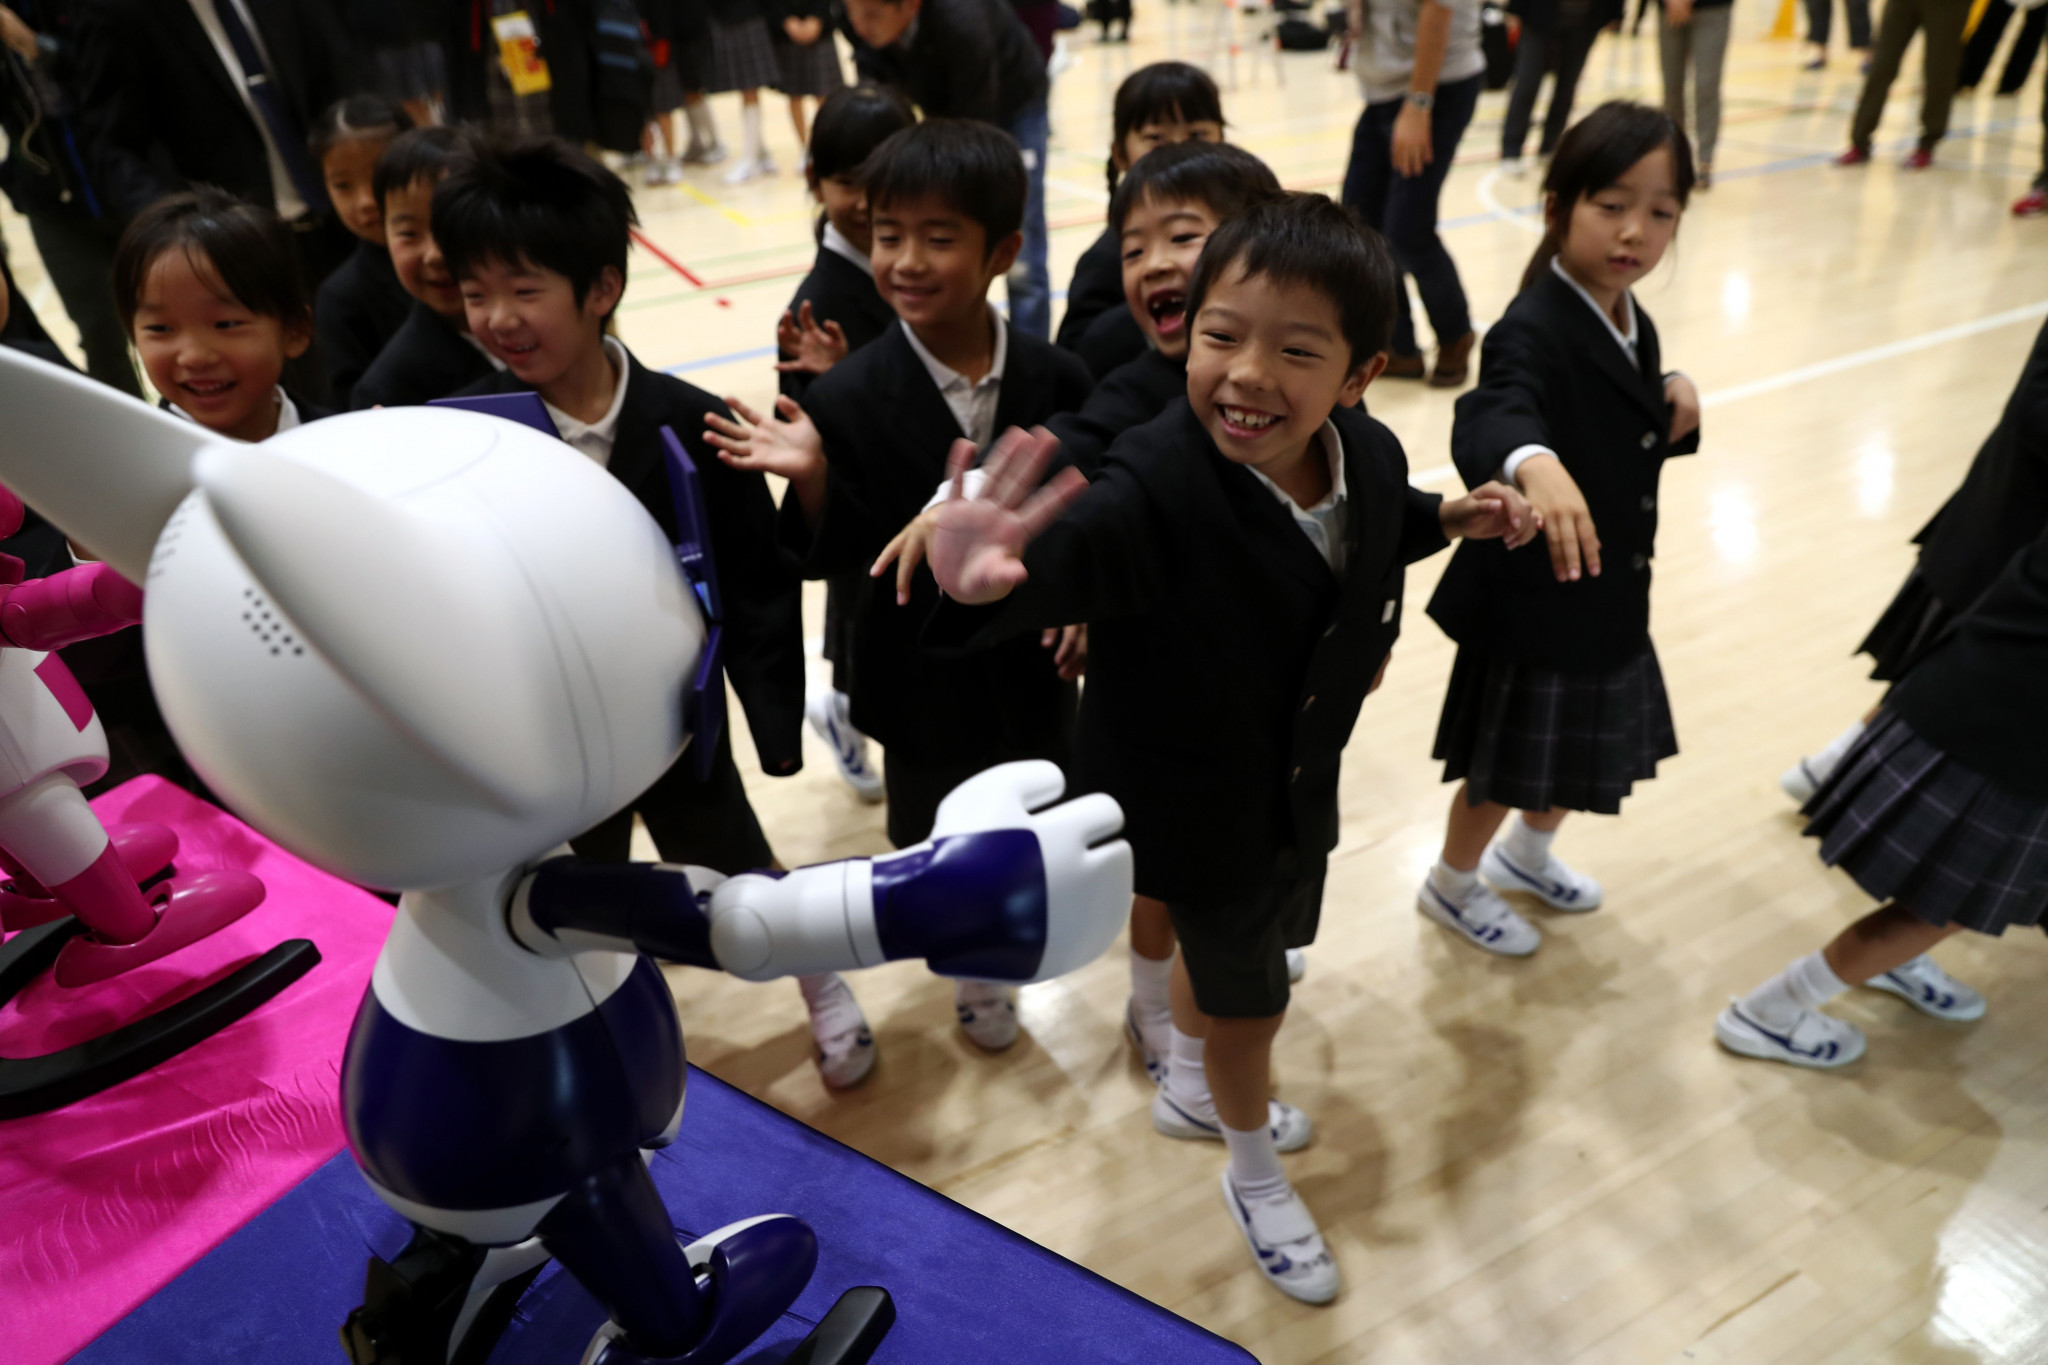 The robots interacted with the children at the school ©Getty Images